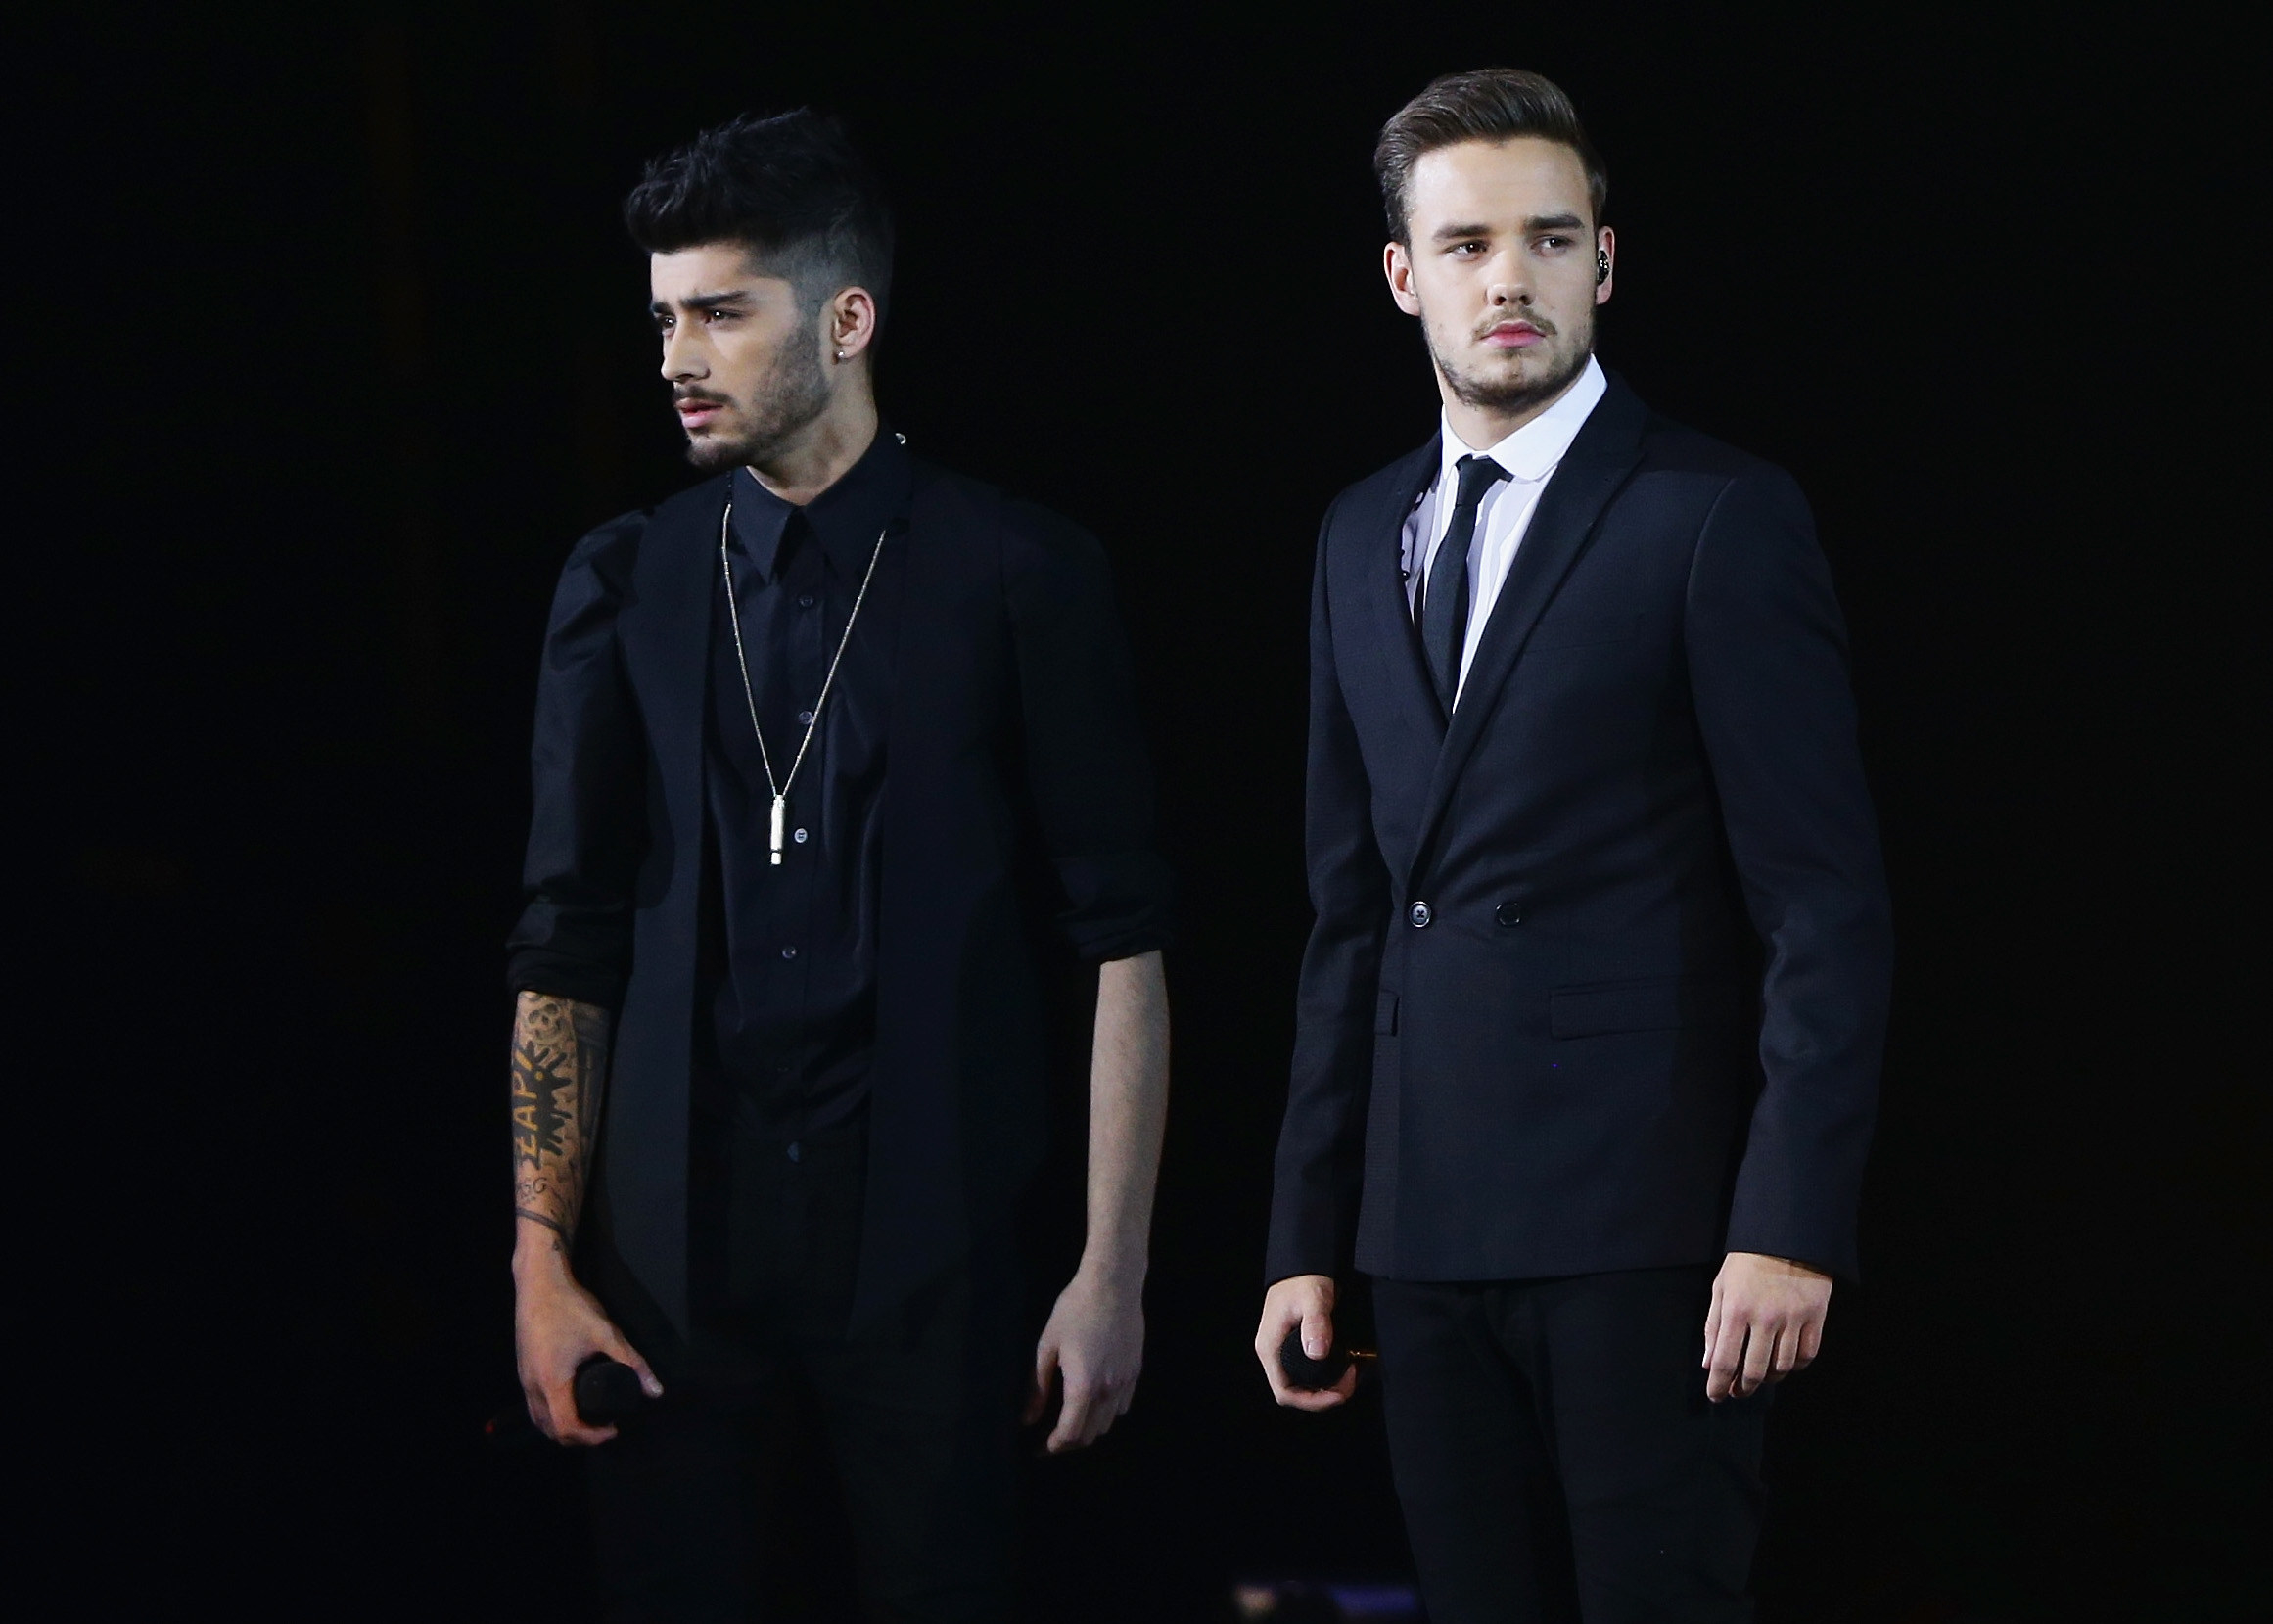 Zayn and Liam together